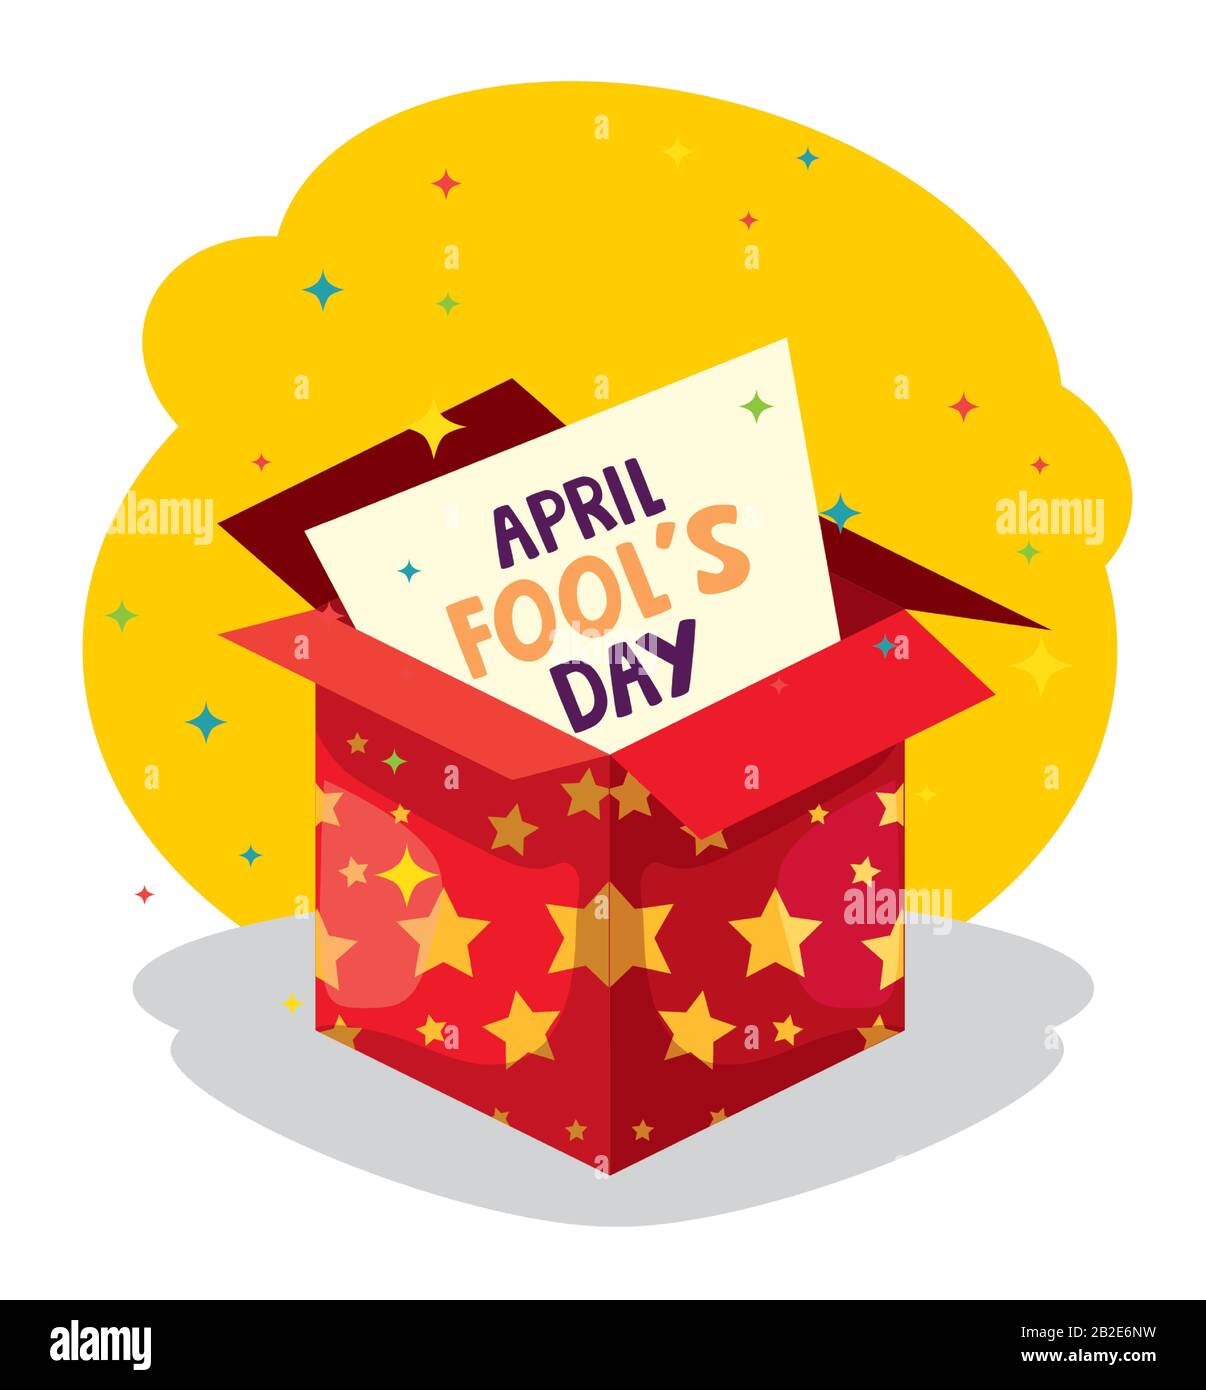 april fools day and box with stars Stock Vector